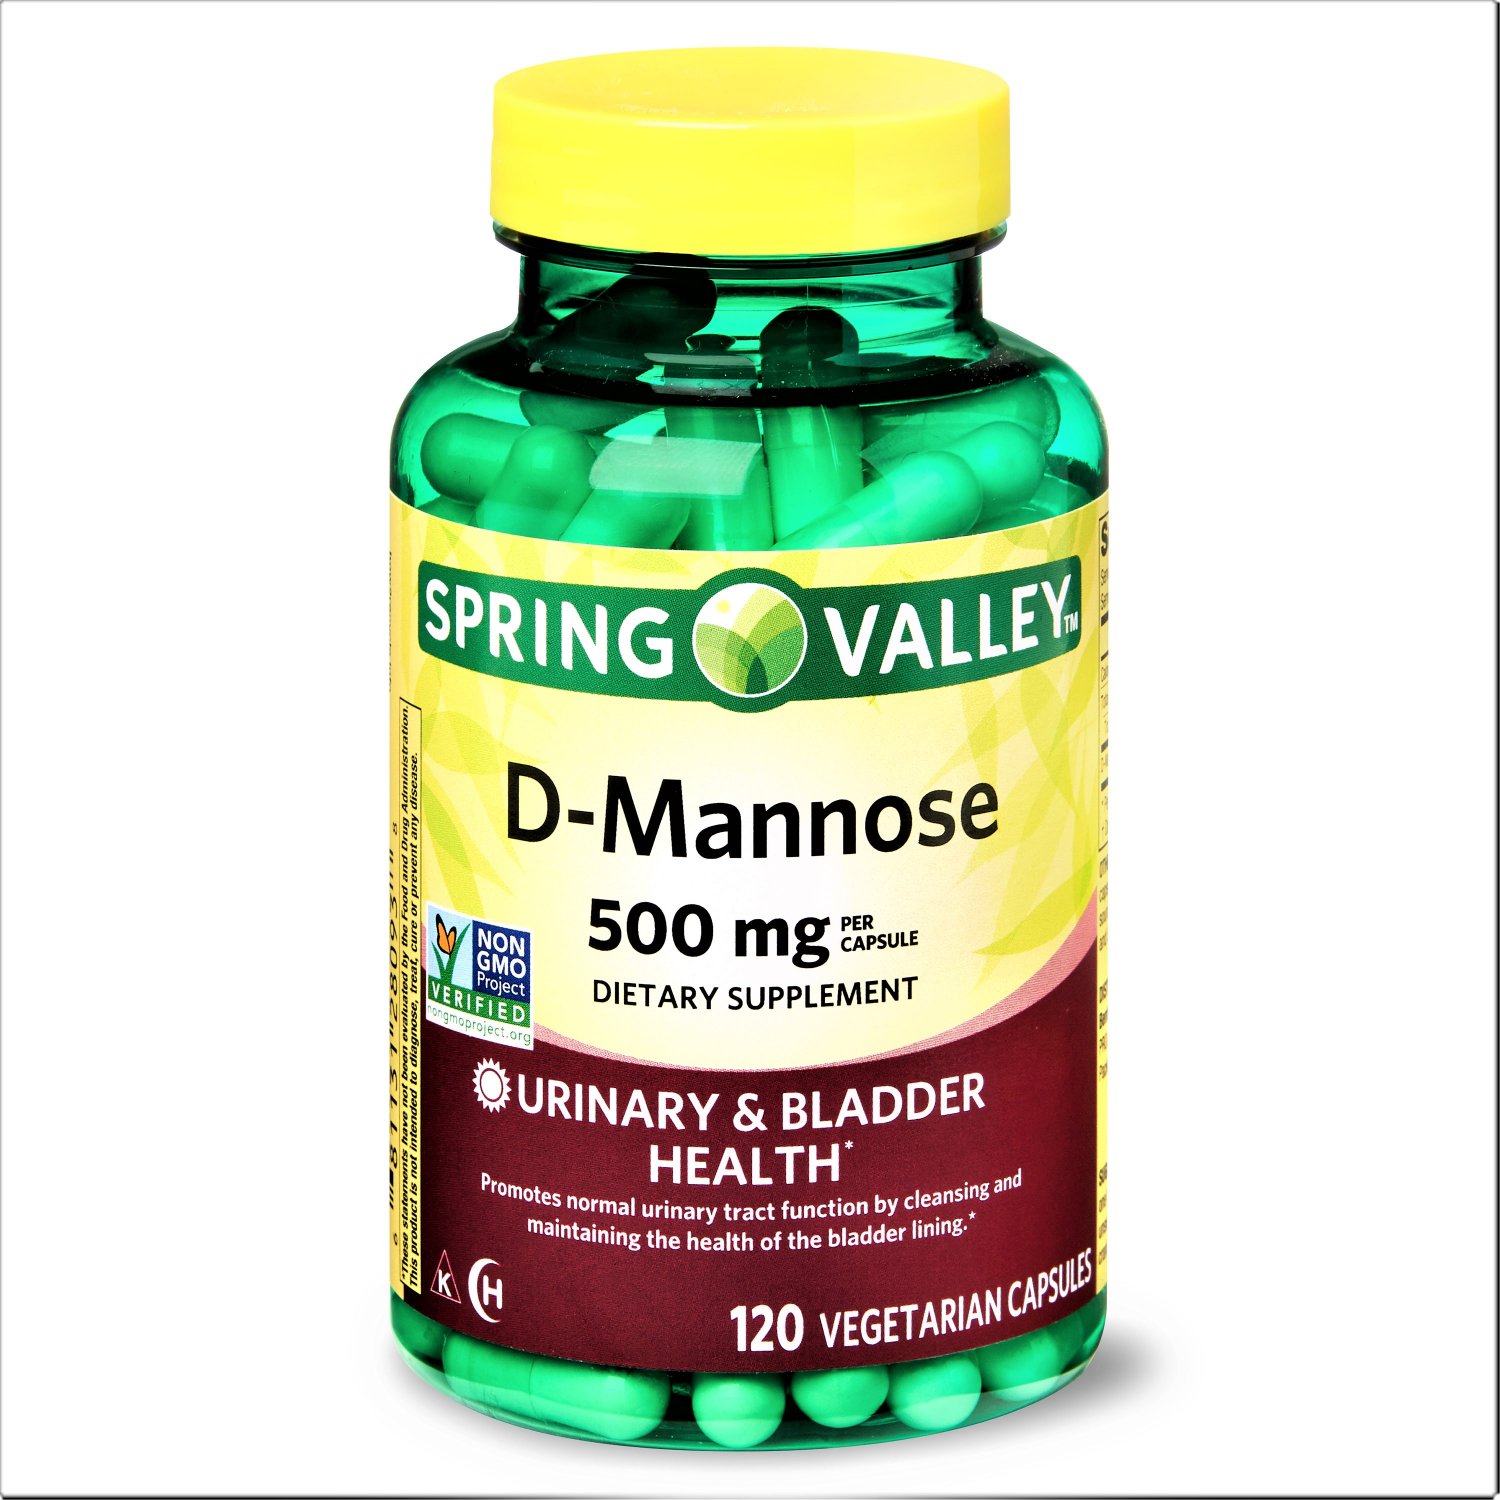 Spring Valley D-Mannose Urinary & Bladder Health- 500mg 120 Vegetarian Capsules